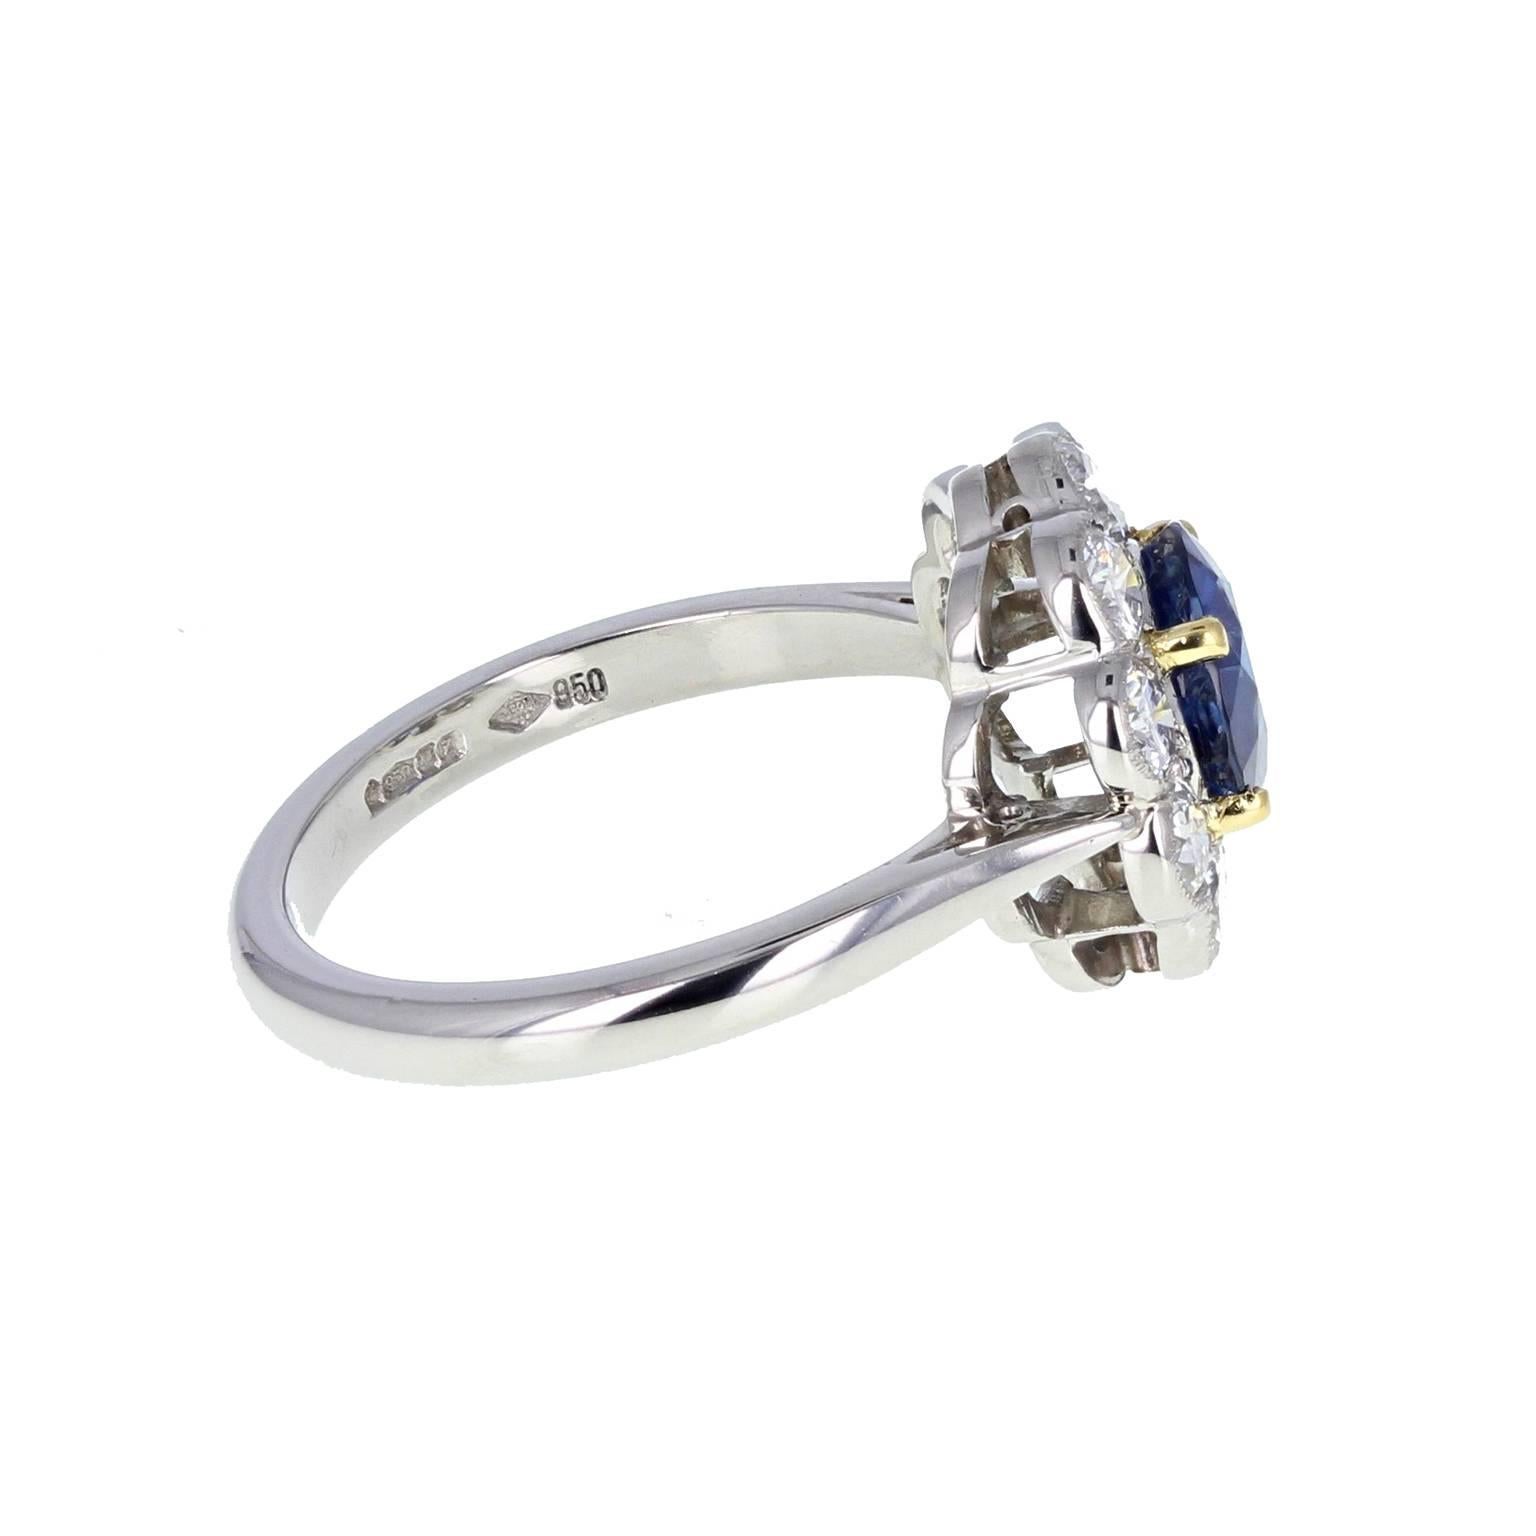 A wonderful, bright, lively and attractive modern ring set in platinum. The central round-cut sapphire exhibits the coveted deep royal blue. Mounted in four 18-carat gold claws and surrounded by 10 round, brilliant-cut diamonds, in a millegrain